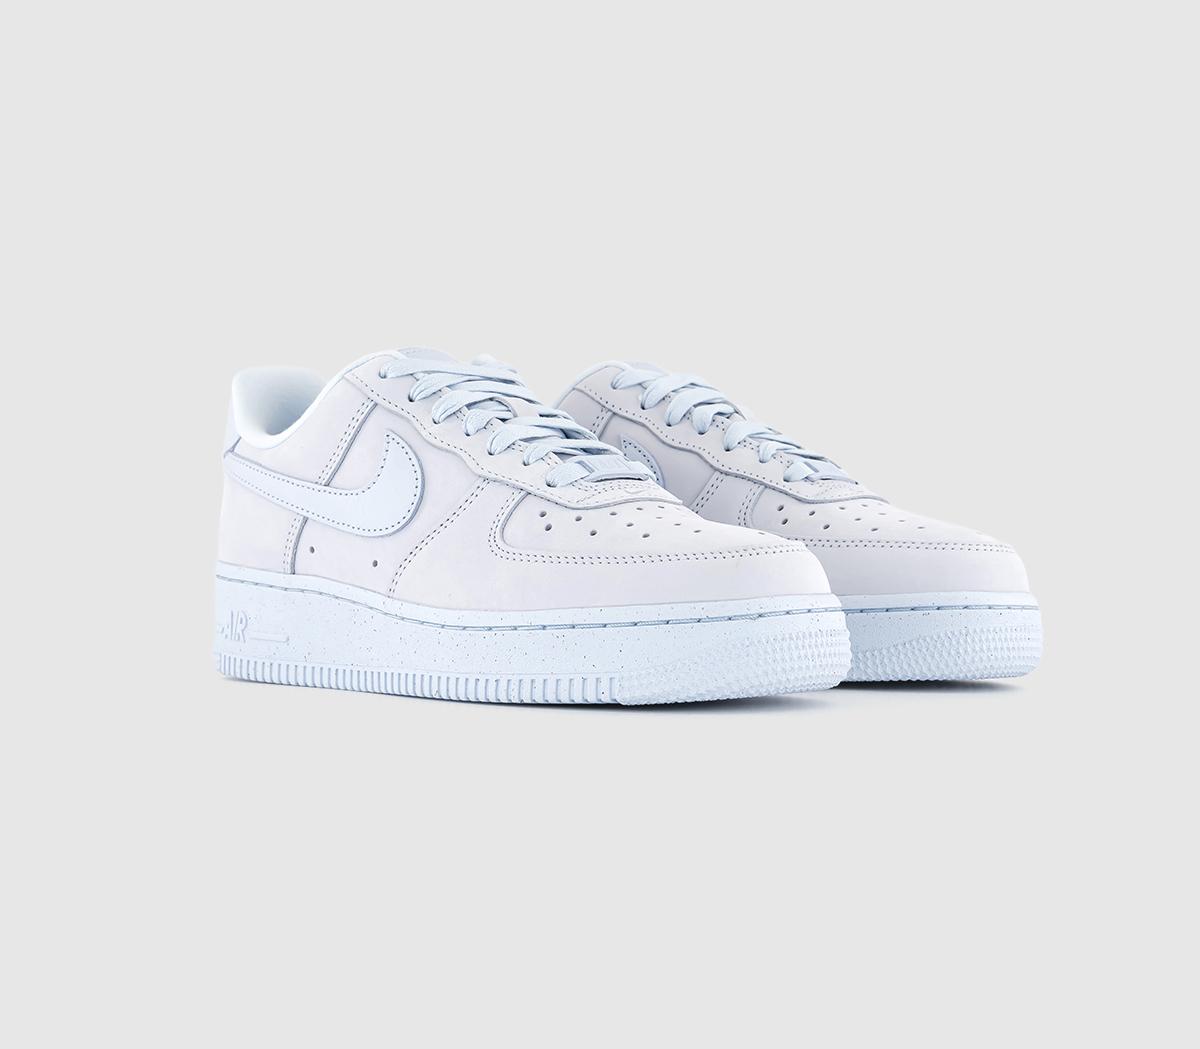 Nike Air Force 1 ’07 Prm Trainers Blue Tint, 5.5